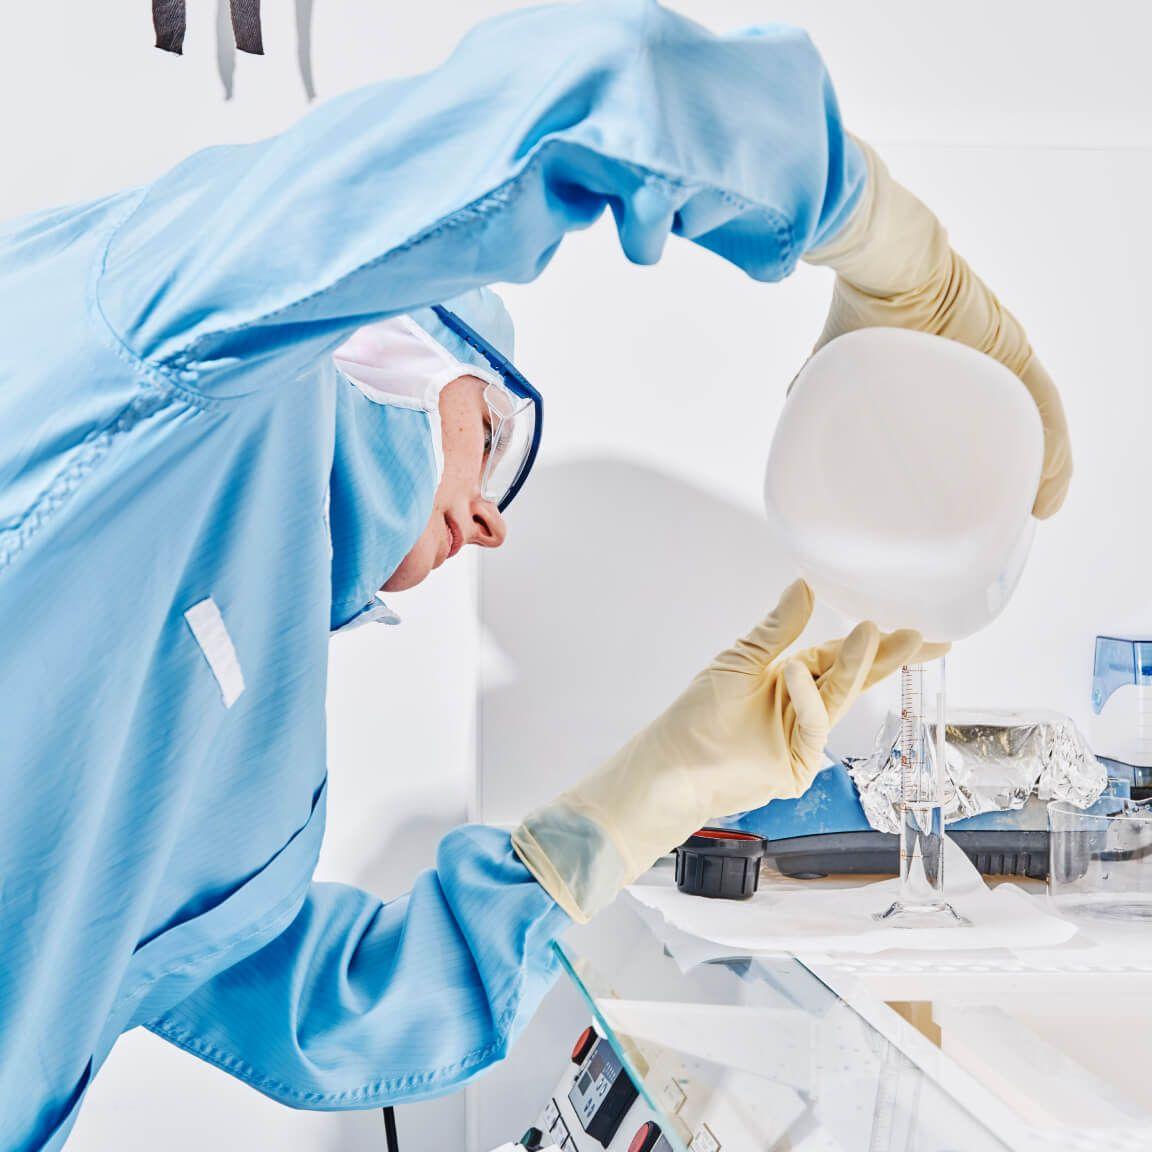 portrait of person in clean room pouring liquid